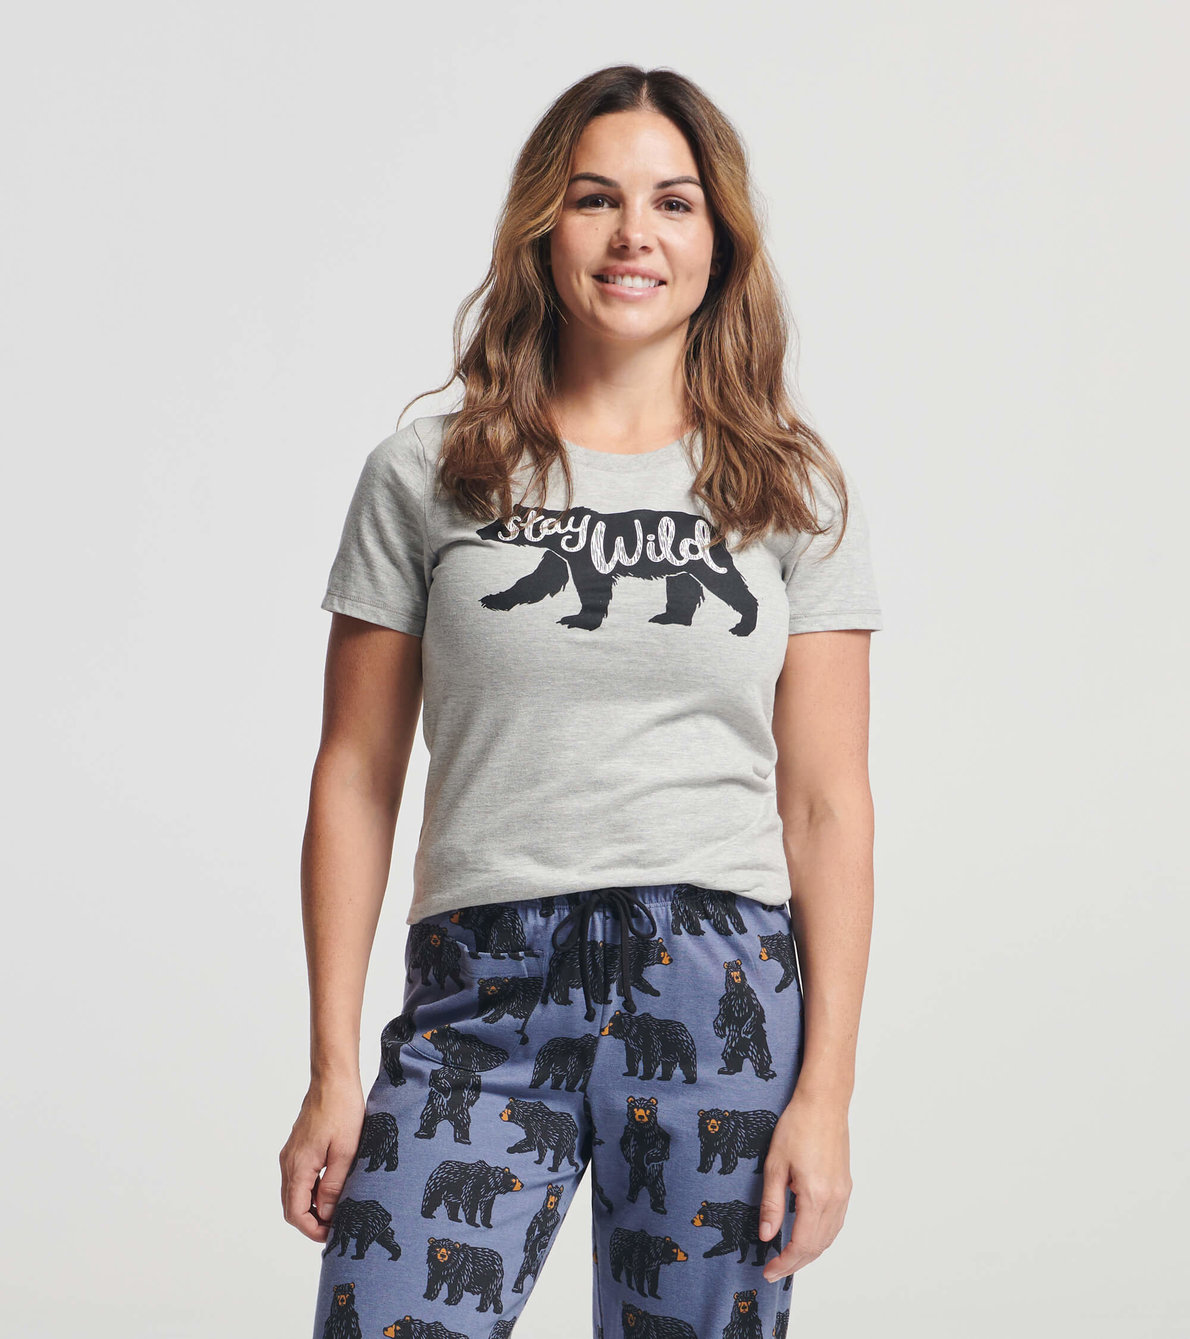 View larger image of Stay Wild Women's Pajama Tee